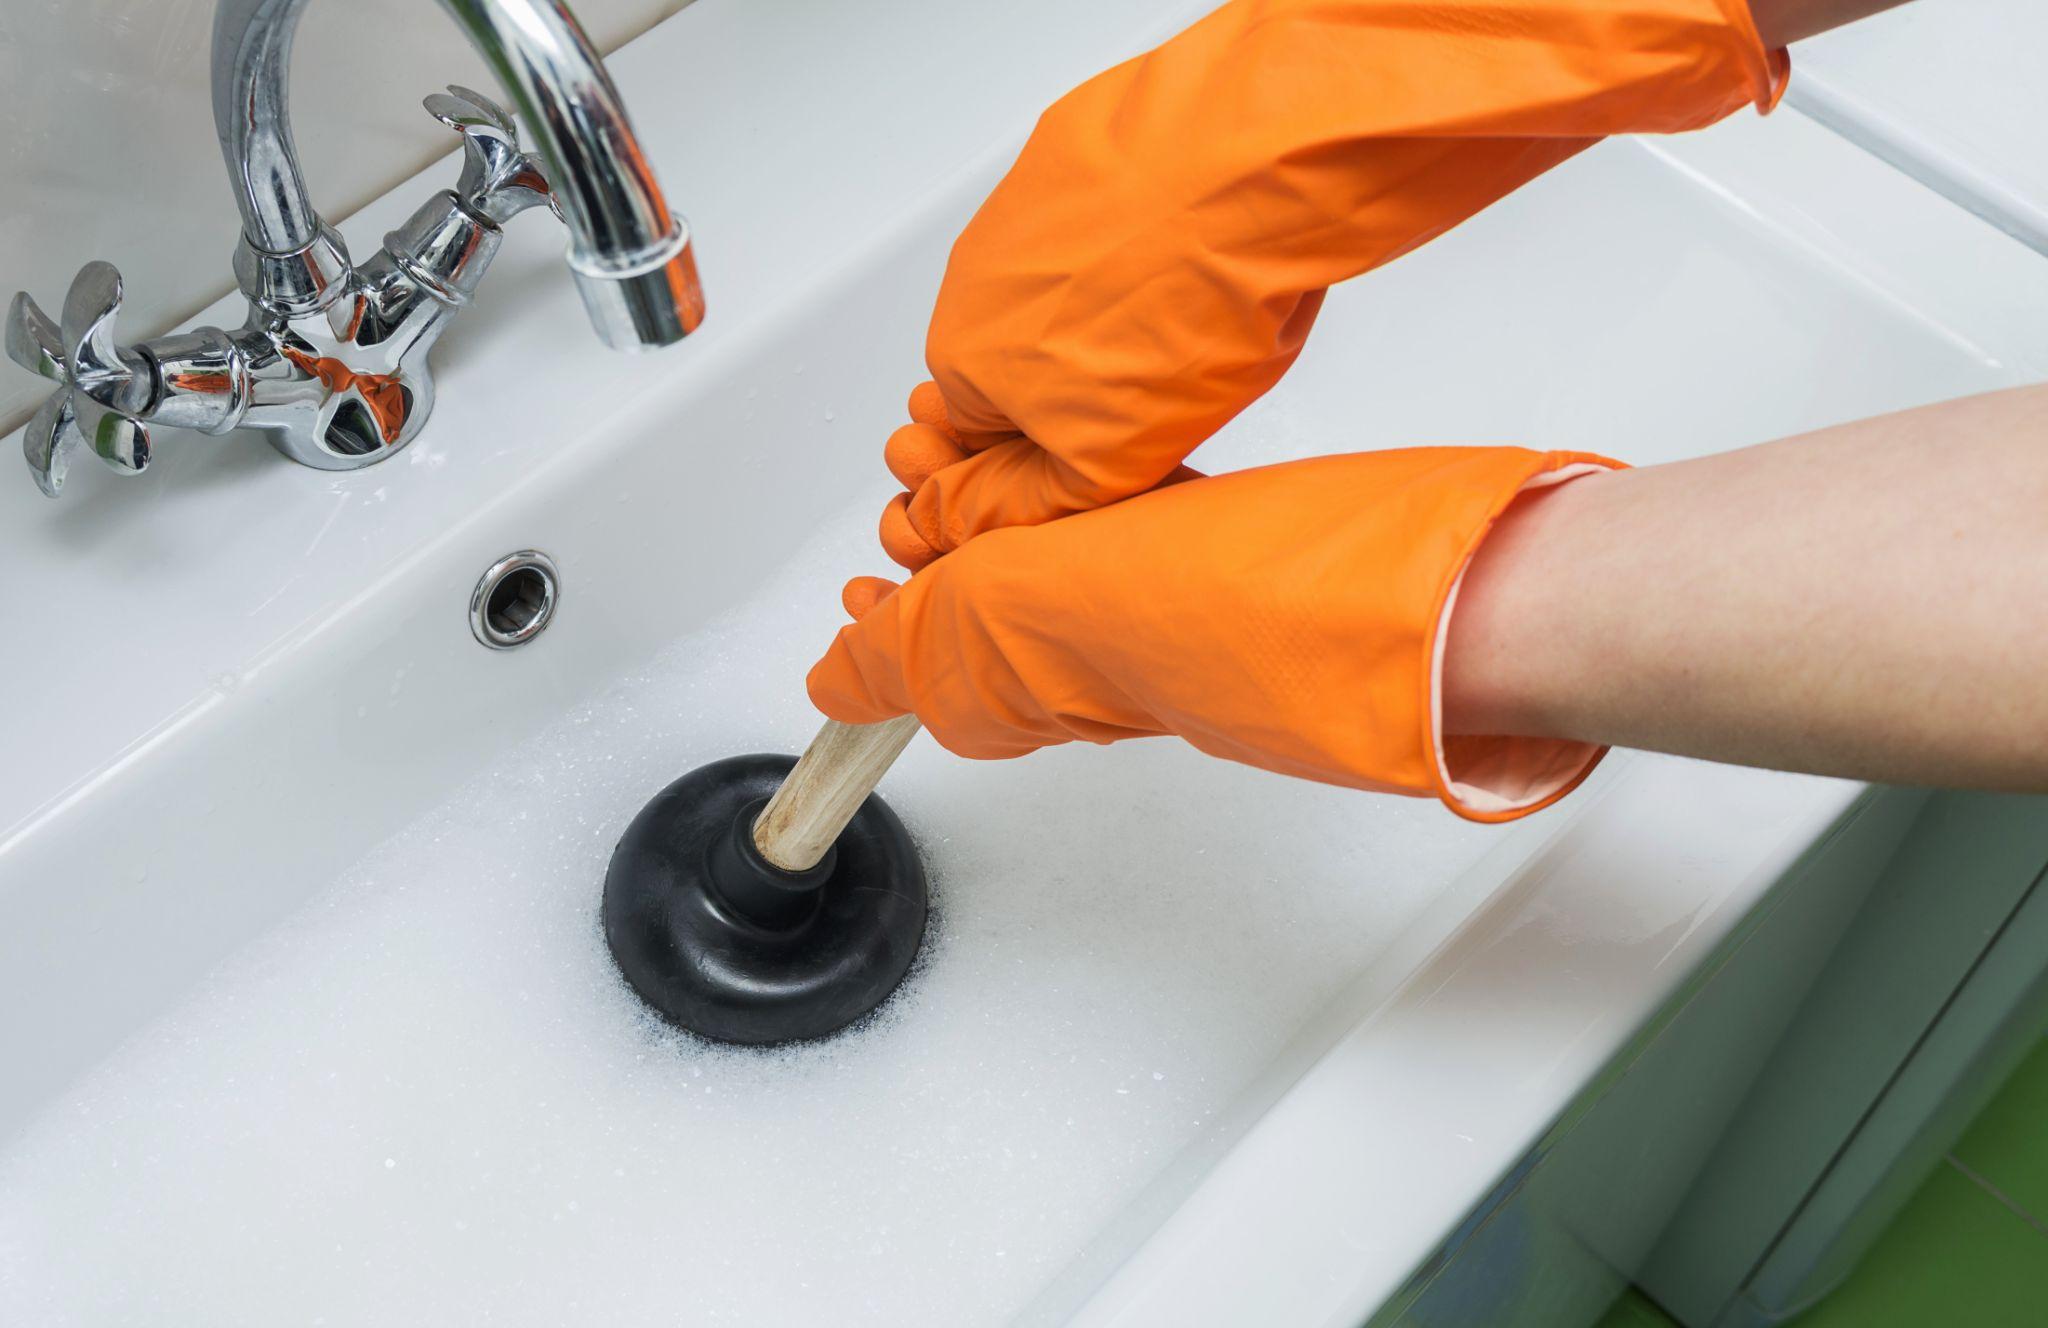 Person in protective orange gloves unblocking a clogged sink with plunger or rubber pump.